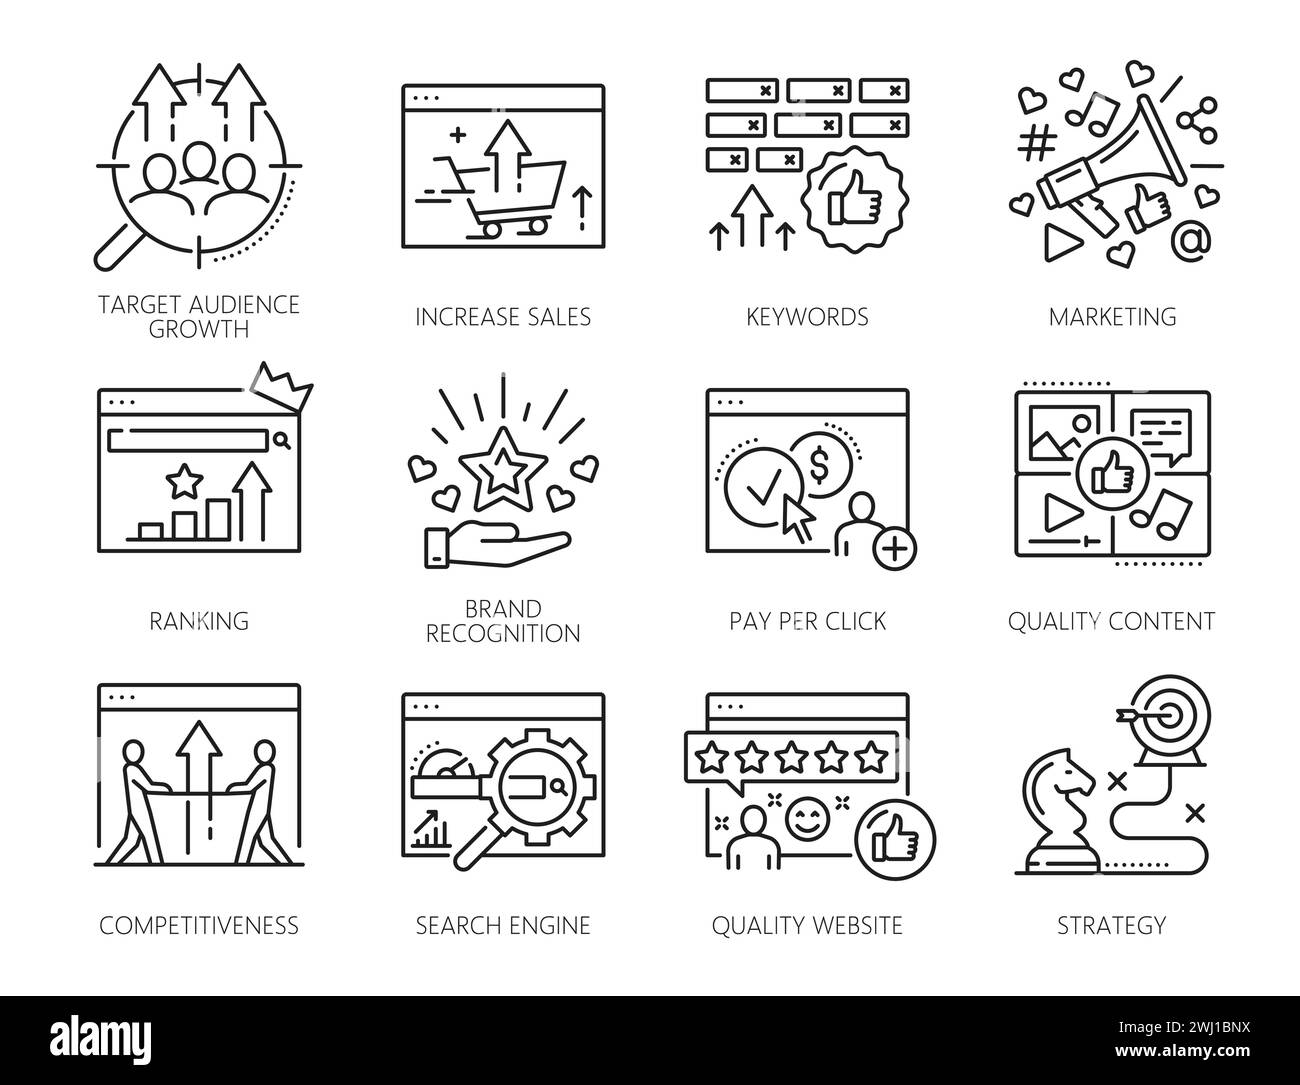 SEM, search engine marketing icons of vector web marketing. Website pages and browser screens with rank, strategy, keywords research and analysis, backlink, pay per click and quality content symbols Stock Vector